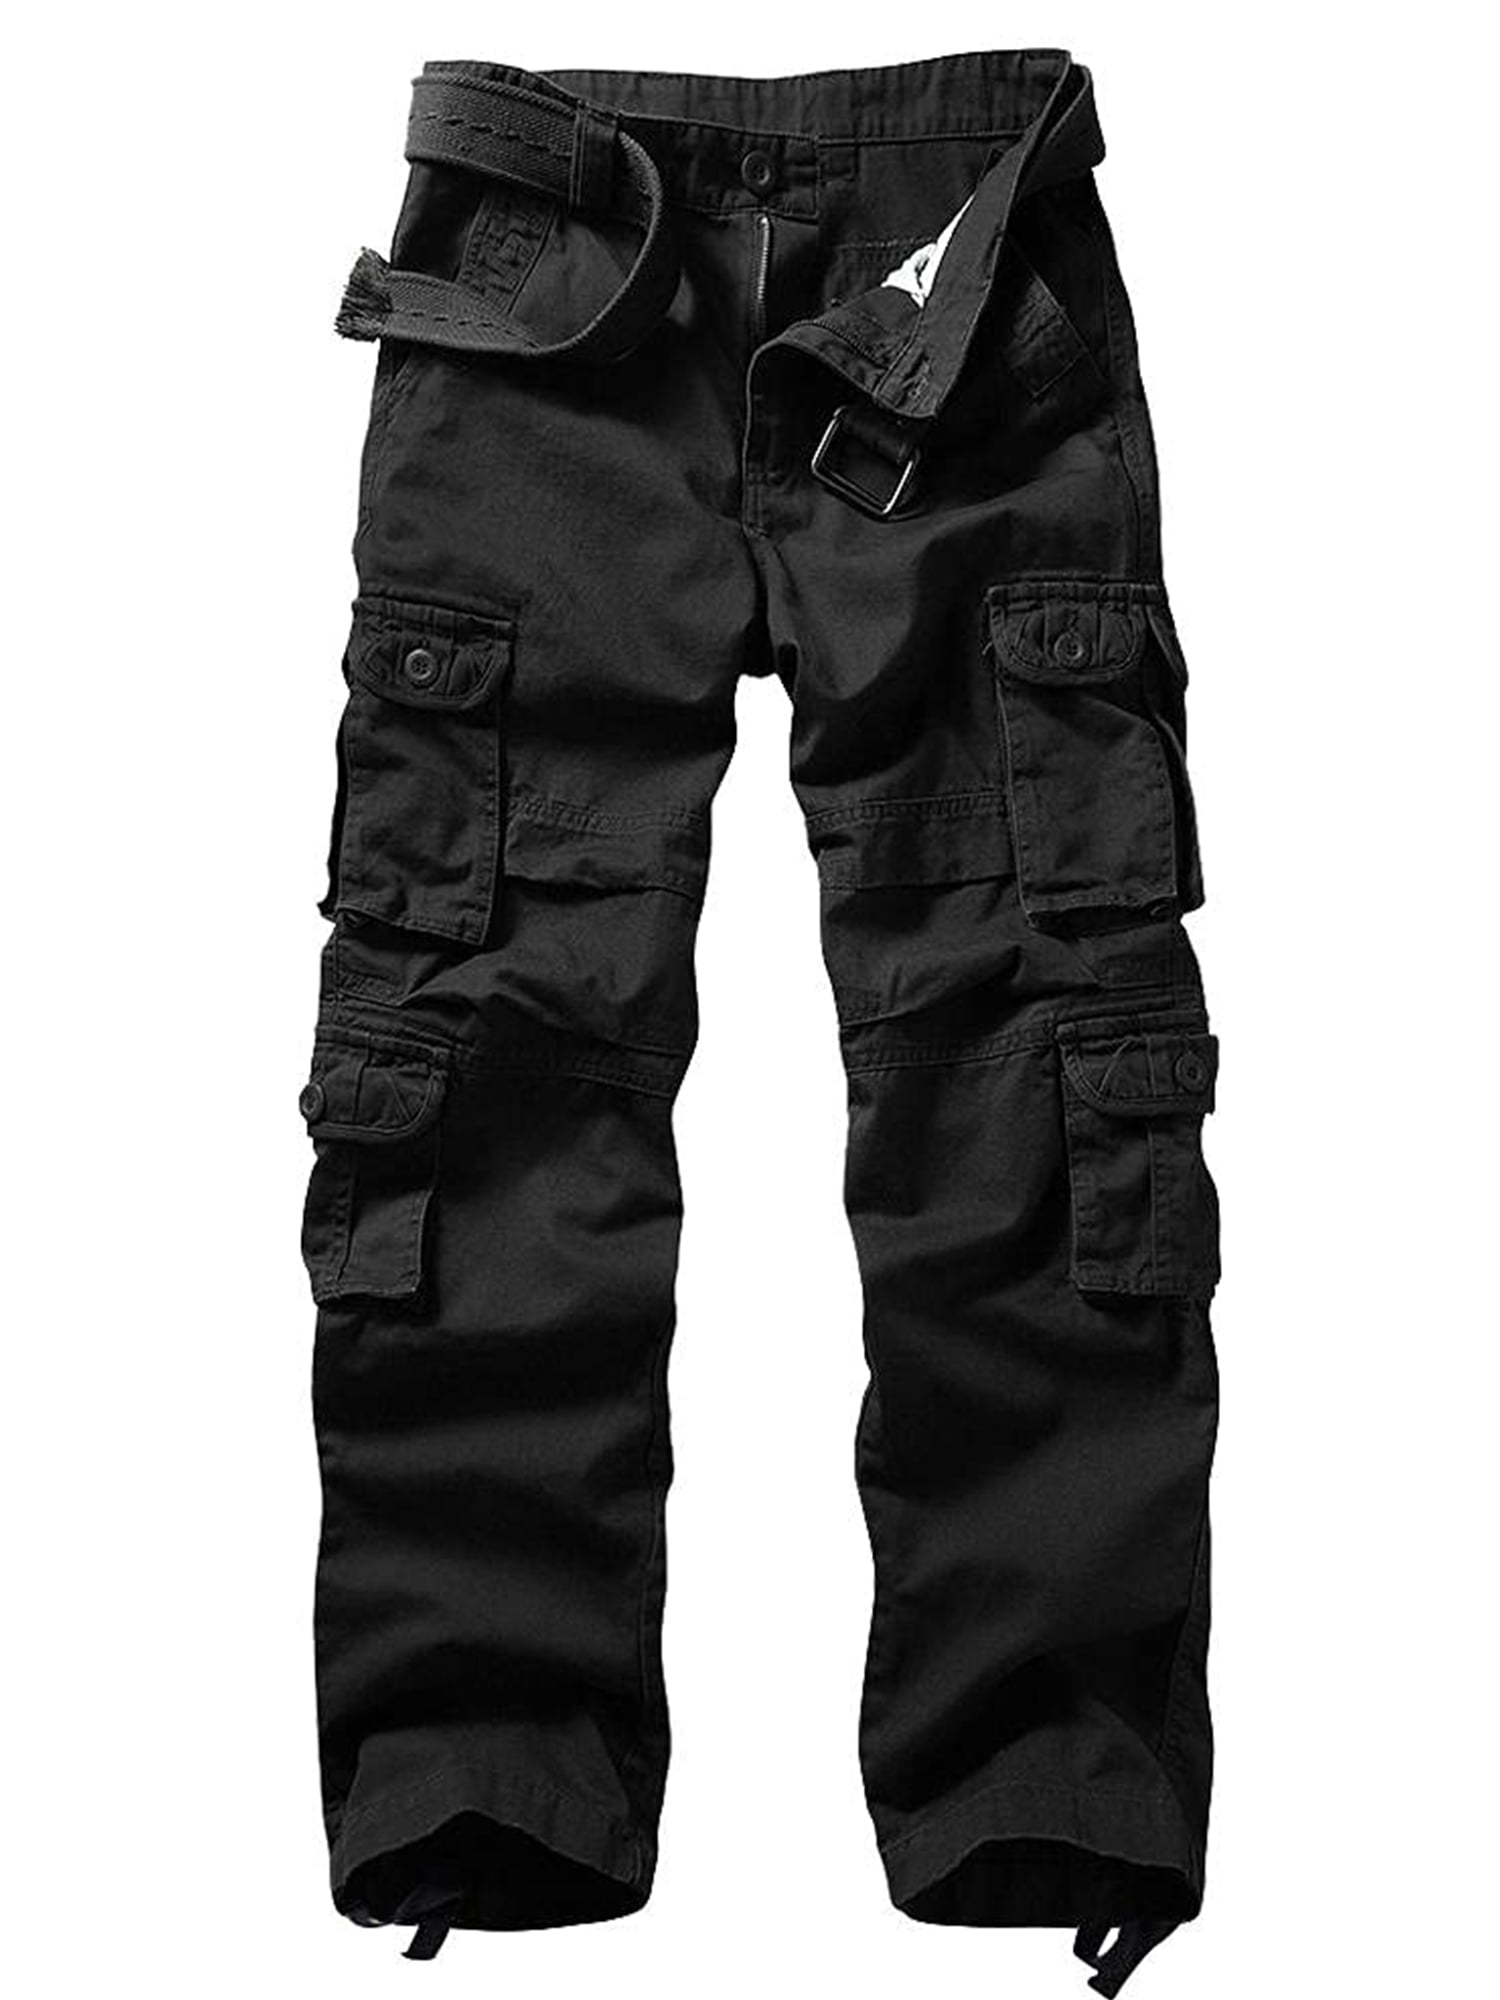 Men's Relaxed Fit Cargo Pants with Multi Pockets Outdoor Work Pants 36 ...